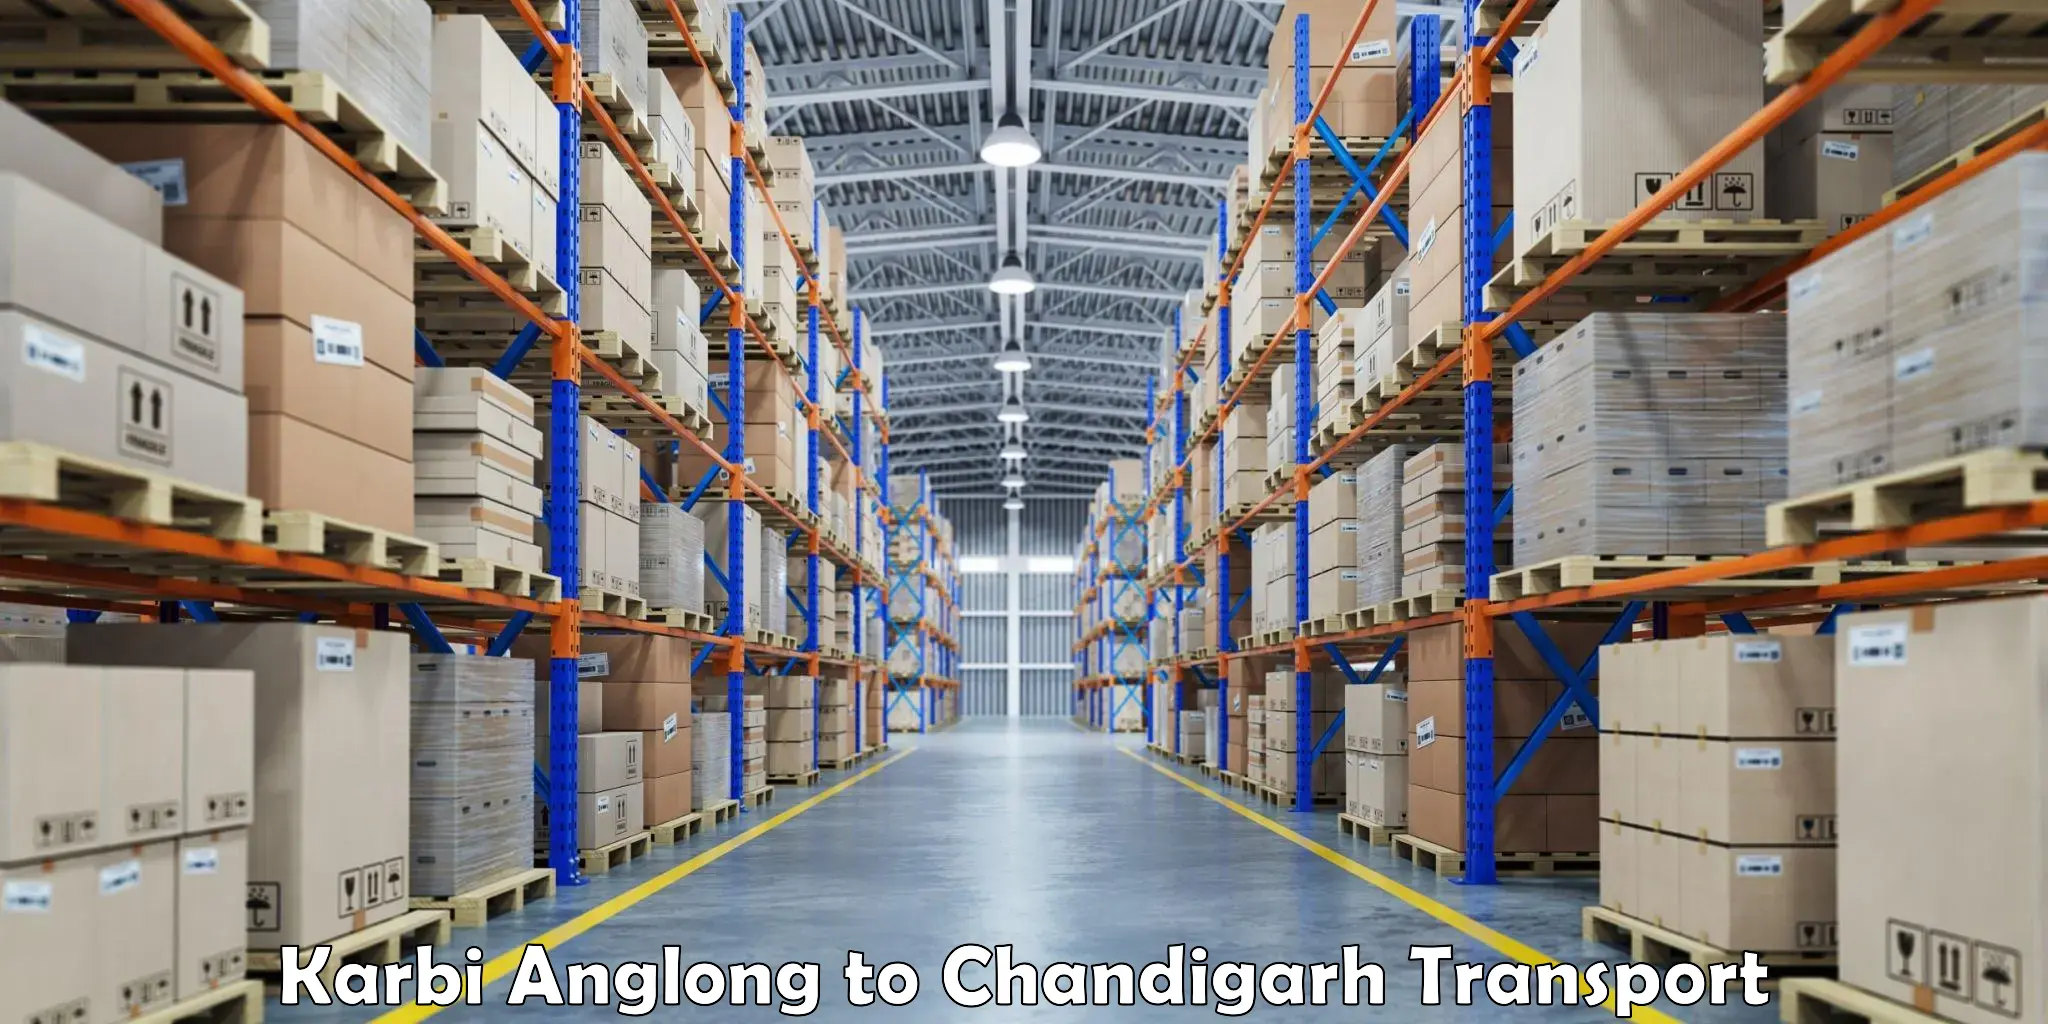 Container transport service Karbi Anglong to Chandigarh